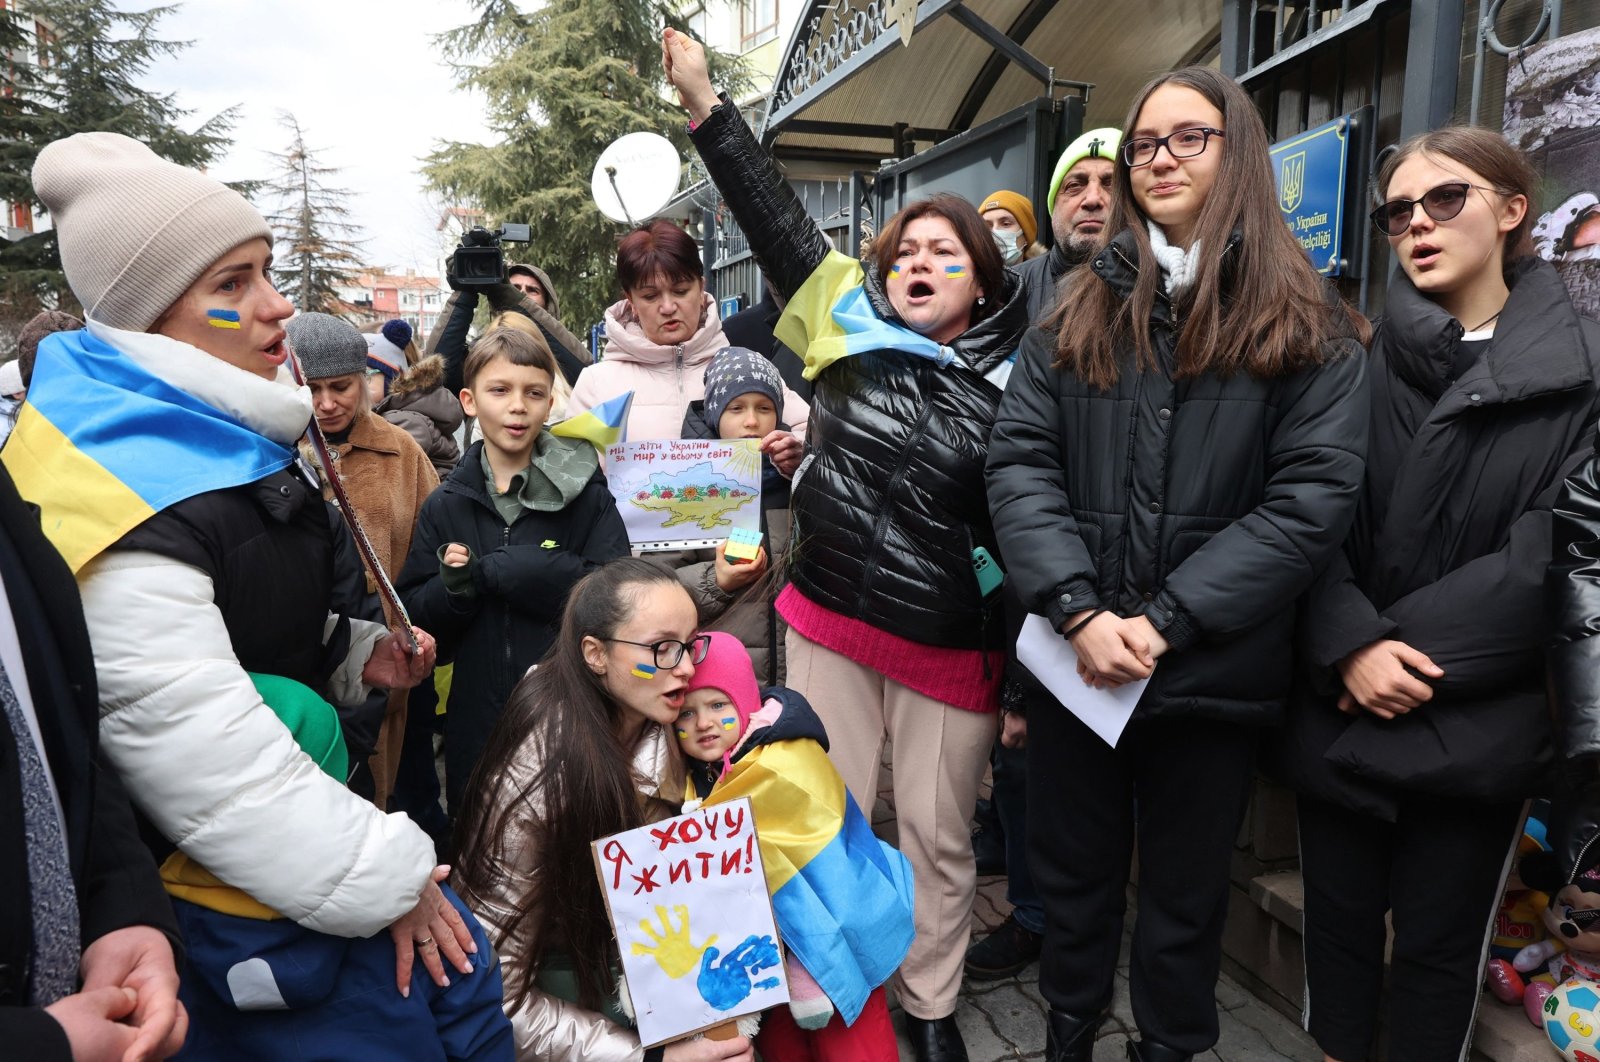 Ukrainians protest to draw attention to the fact that many children were killed in the ongoing Russian occupation of Ukraine in front of the Ukrainian Embassy in Ankara, Türkiye, March 19, 2022. (AFP Photo)